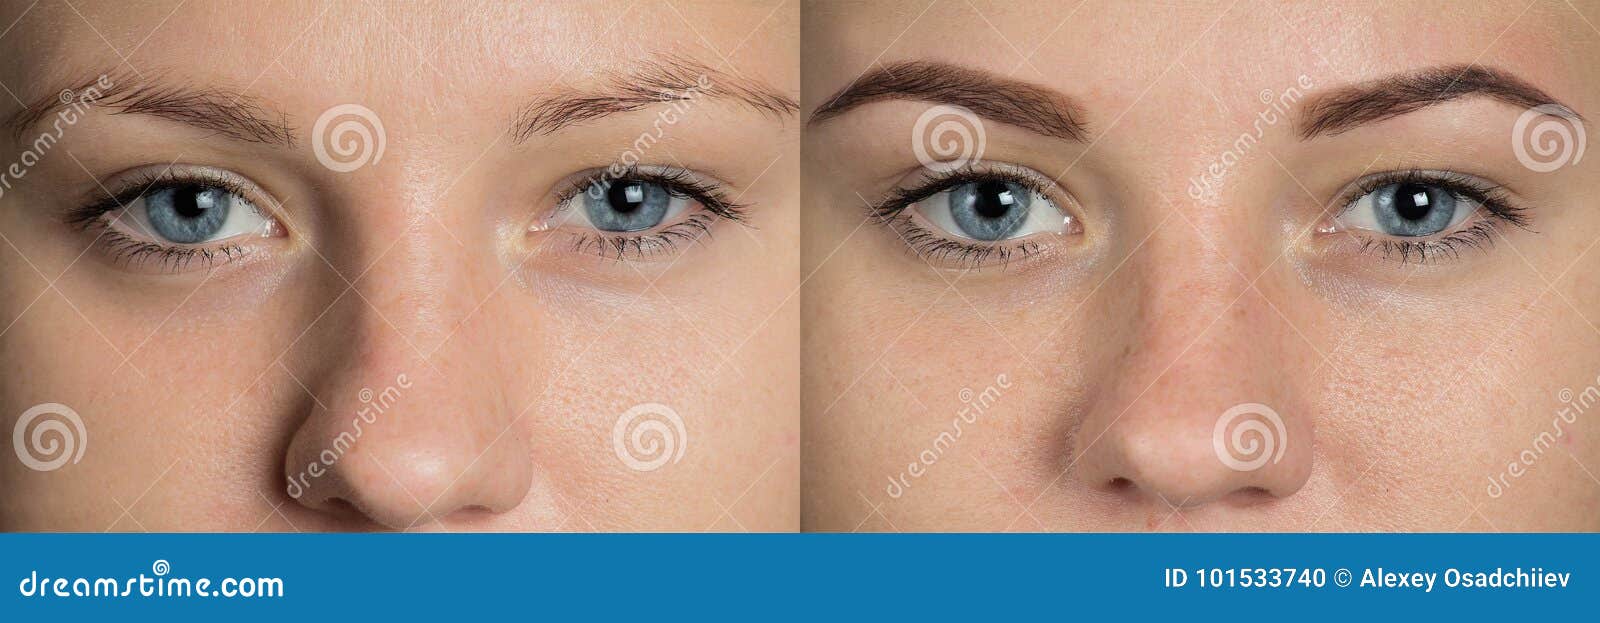 eye brows before after correction